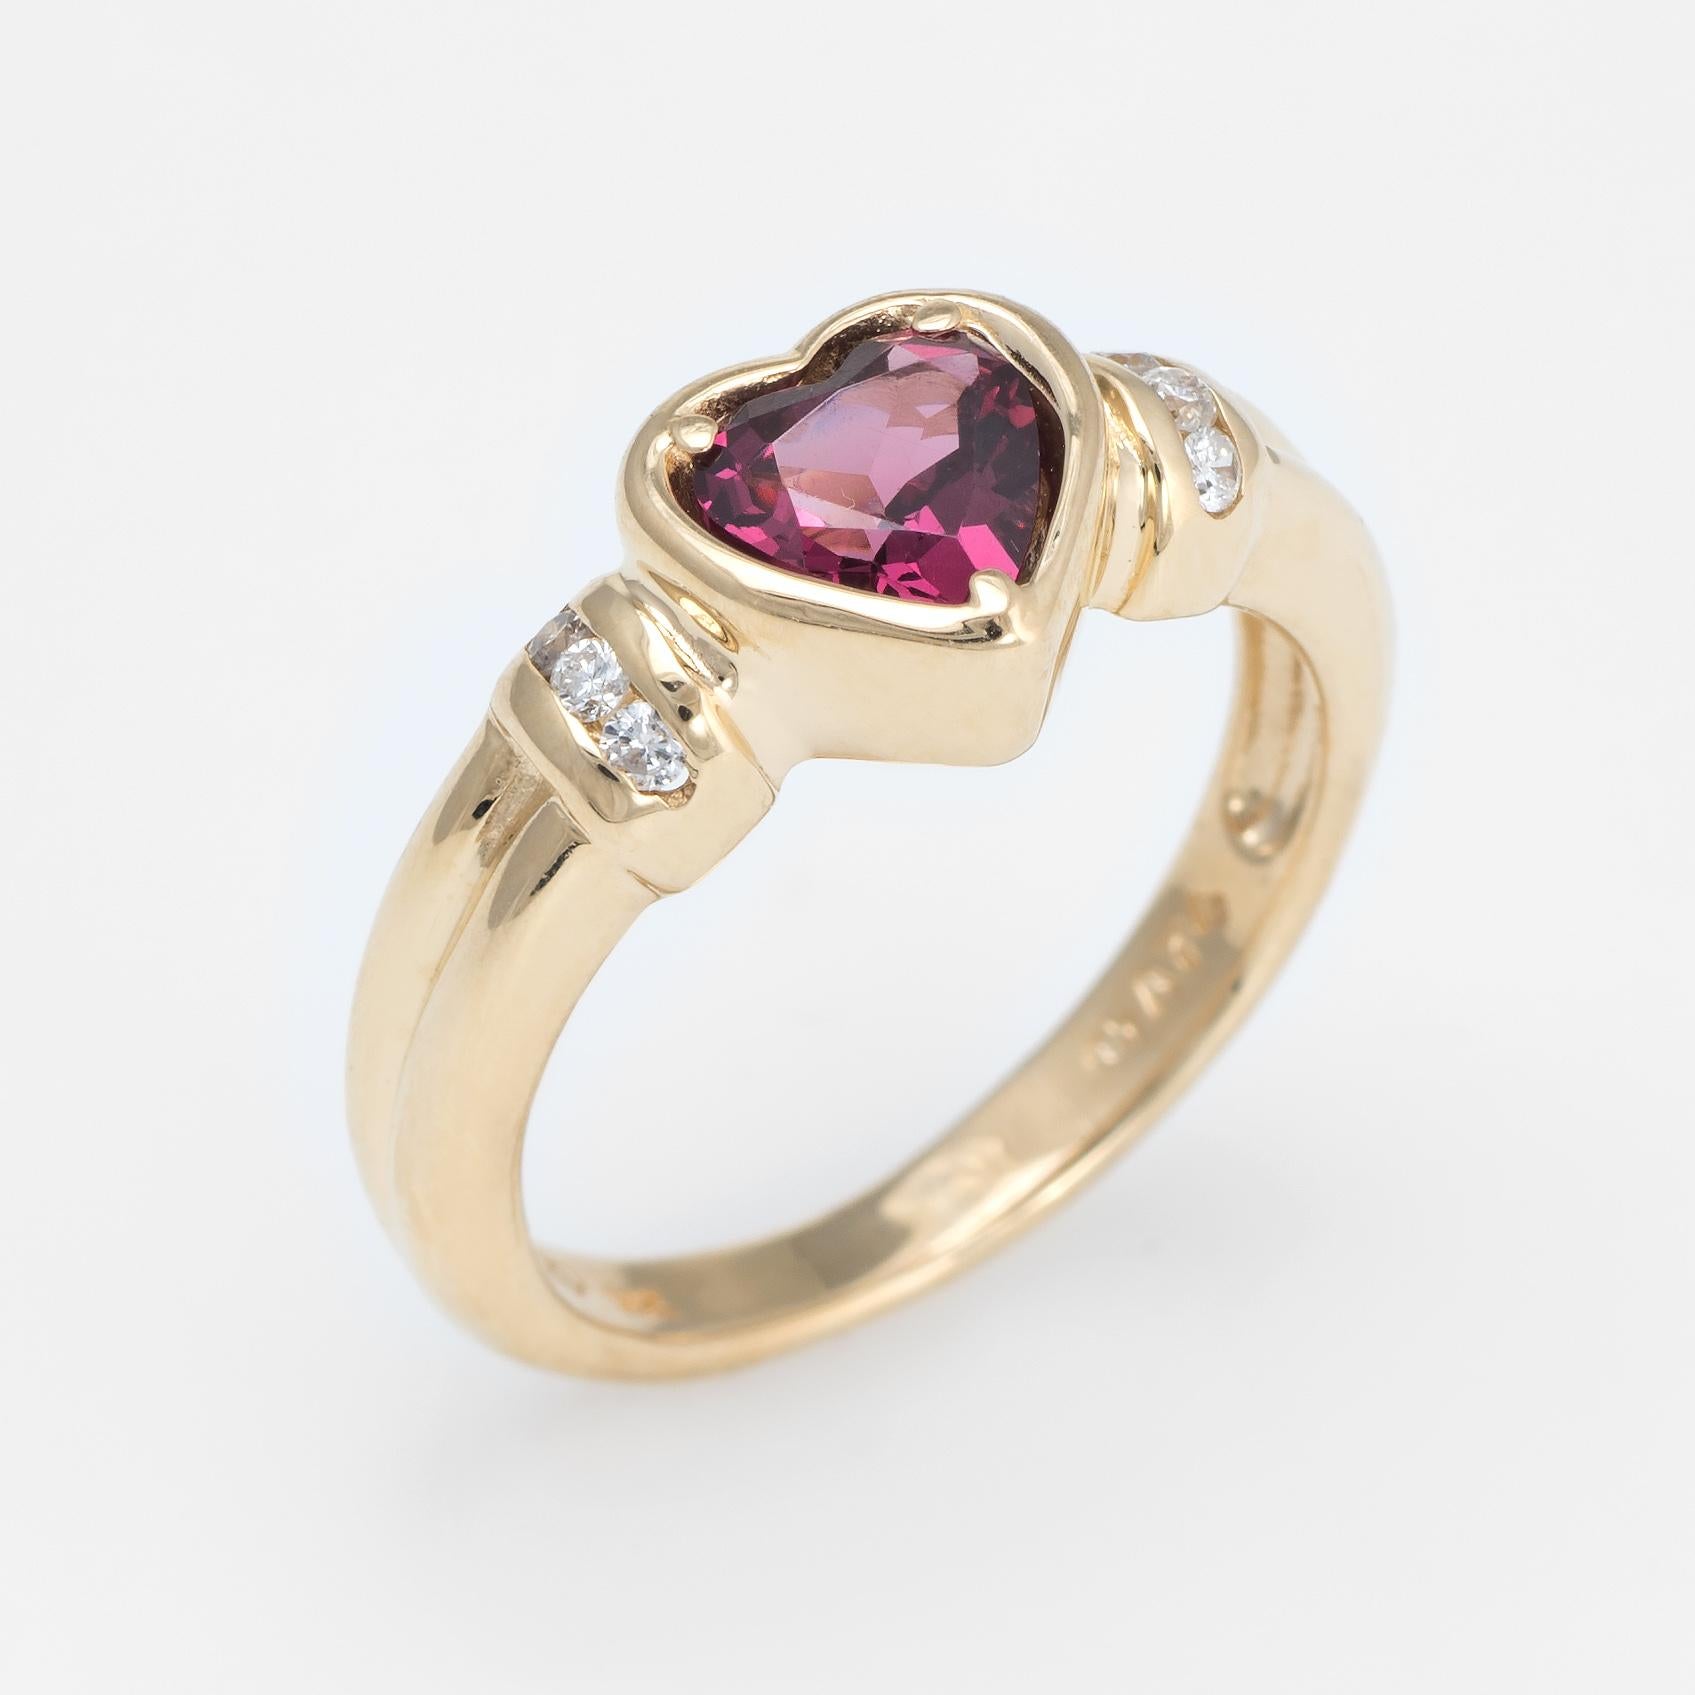 Stylish estate rhodolite garnet & diamond heart ring crafted in 14 karat yellow gold. 

Heart cut rhodolite garnet is estimated at 1.25 carats, accented with an estimated 0.06 carats of diamonds (estimated at H-I color and SI2-I1 clarity). The